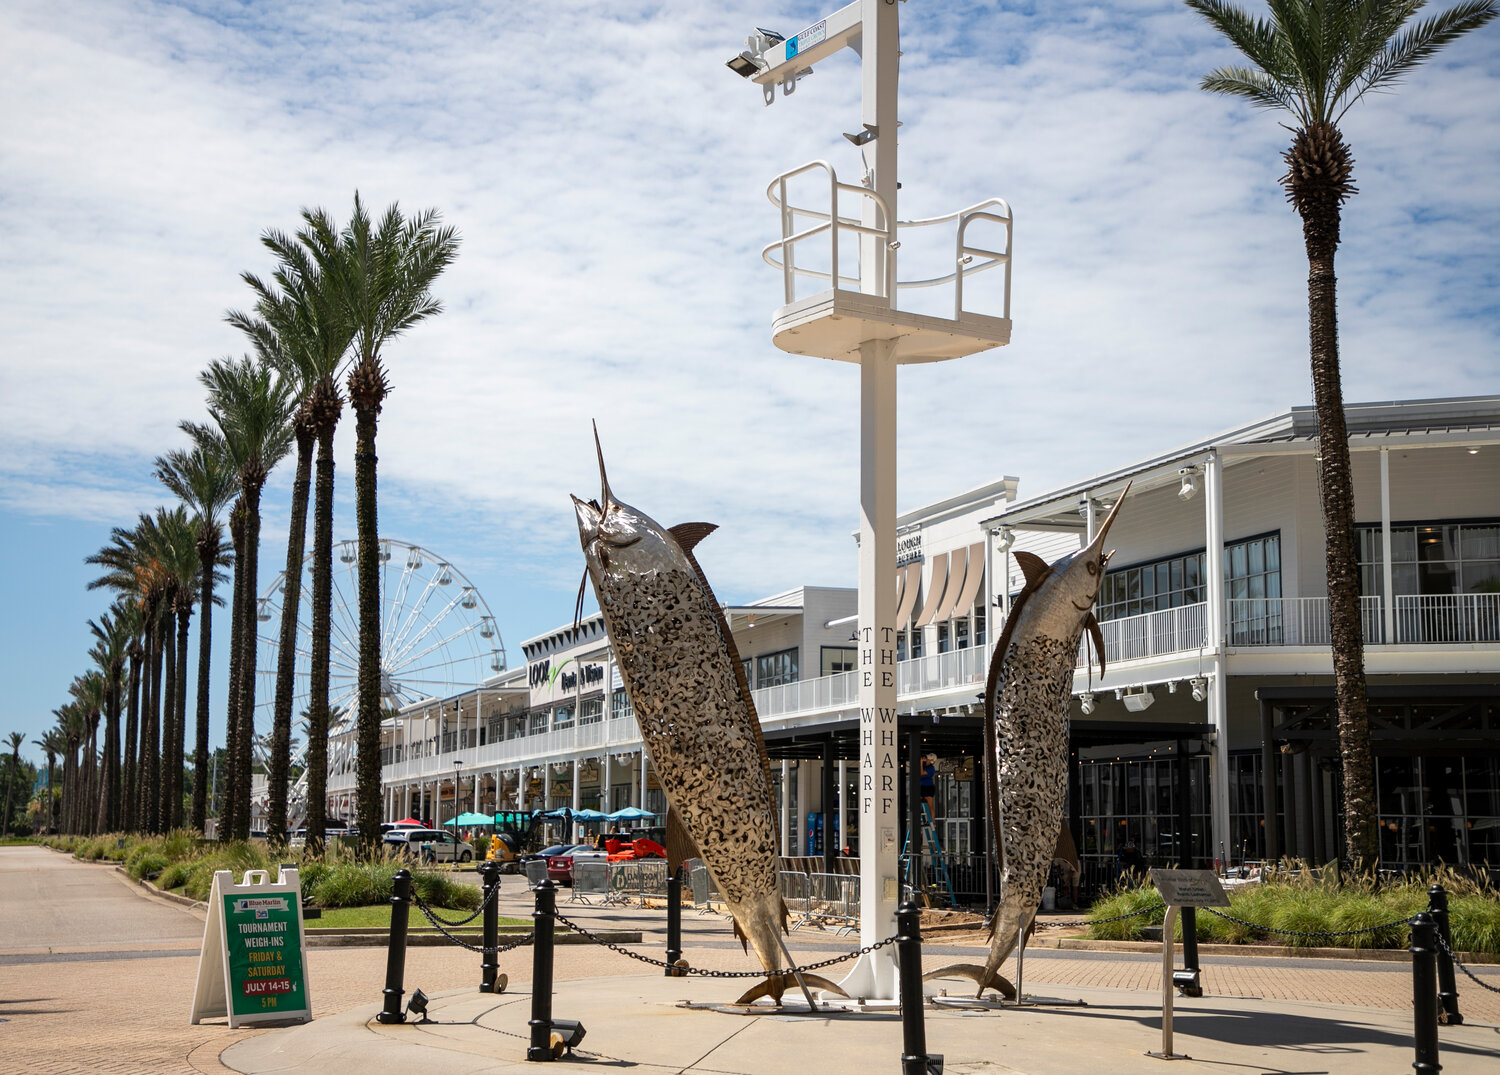 The biggest fish caught at the Blue Marlin Grand Championship will be weighed in at Marlin Circle this weekend to determine the winner of the greatest show in sportfishing hosted at The Wharf in Orange Beach.